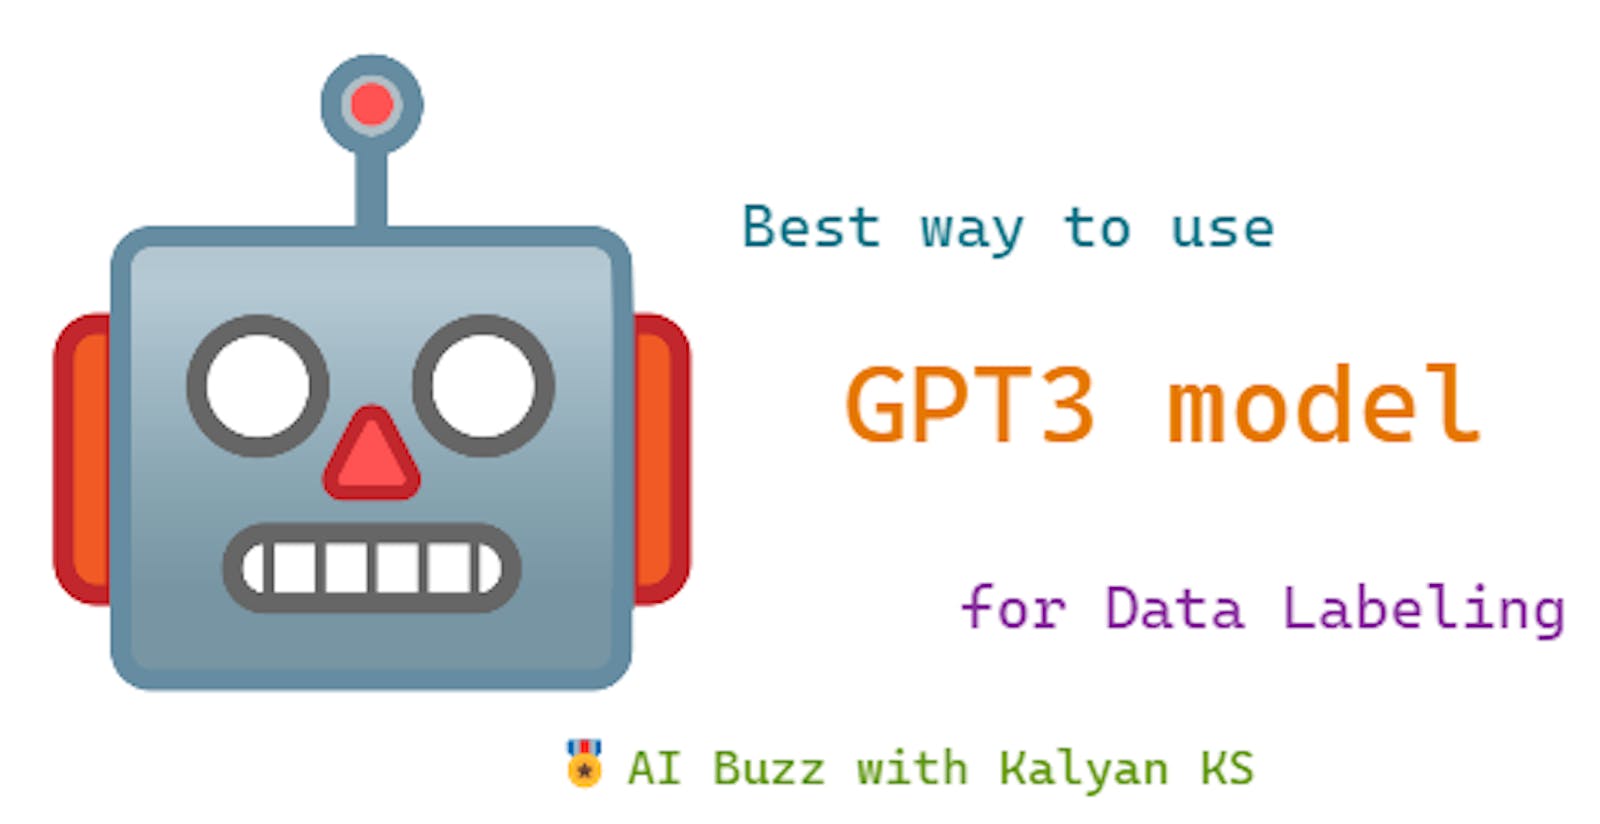 Exploring GPT3 - Best Way to Use GPT3 for Data Labeling (aka Data Annotation)